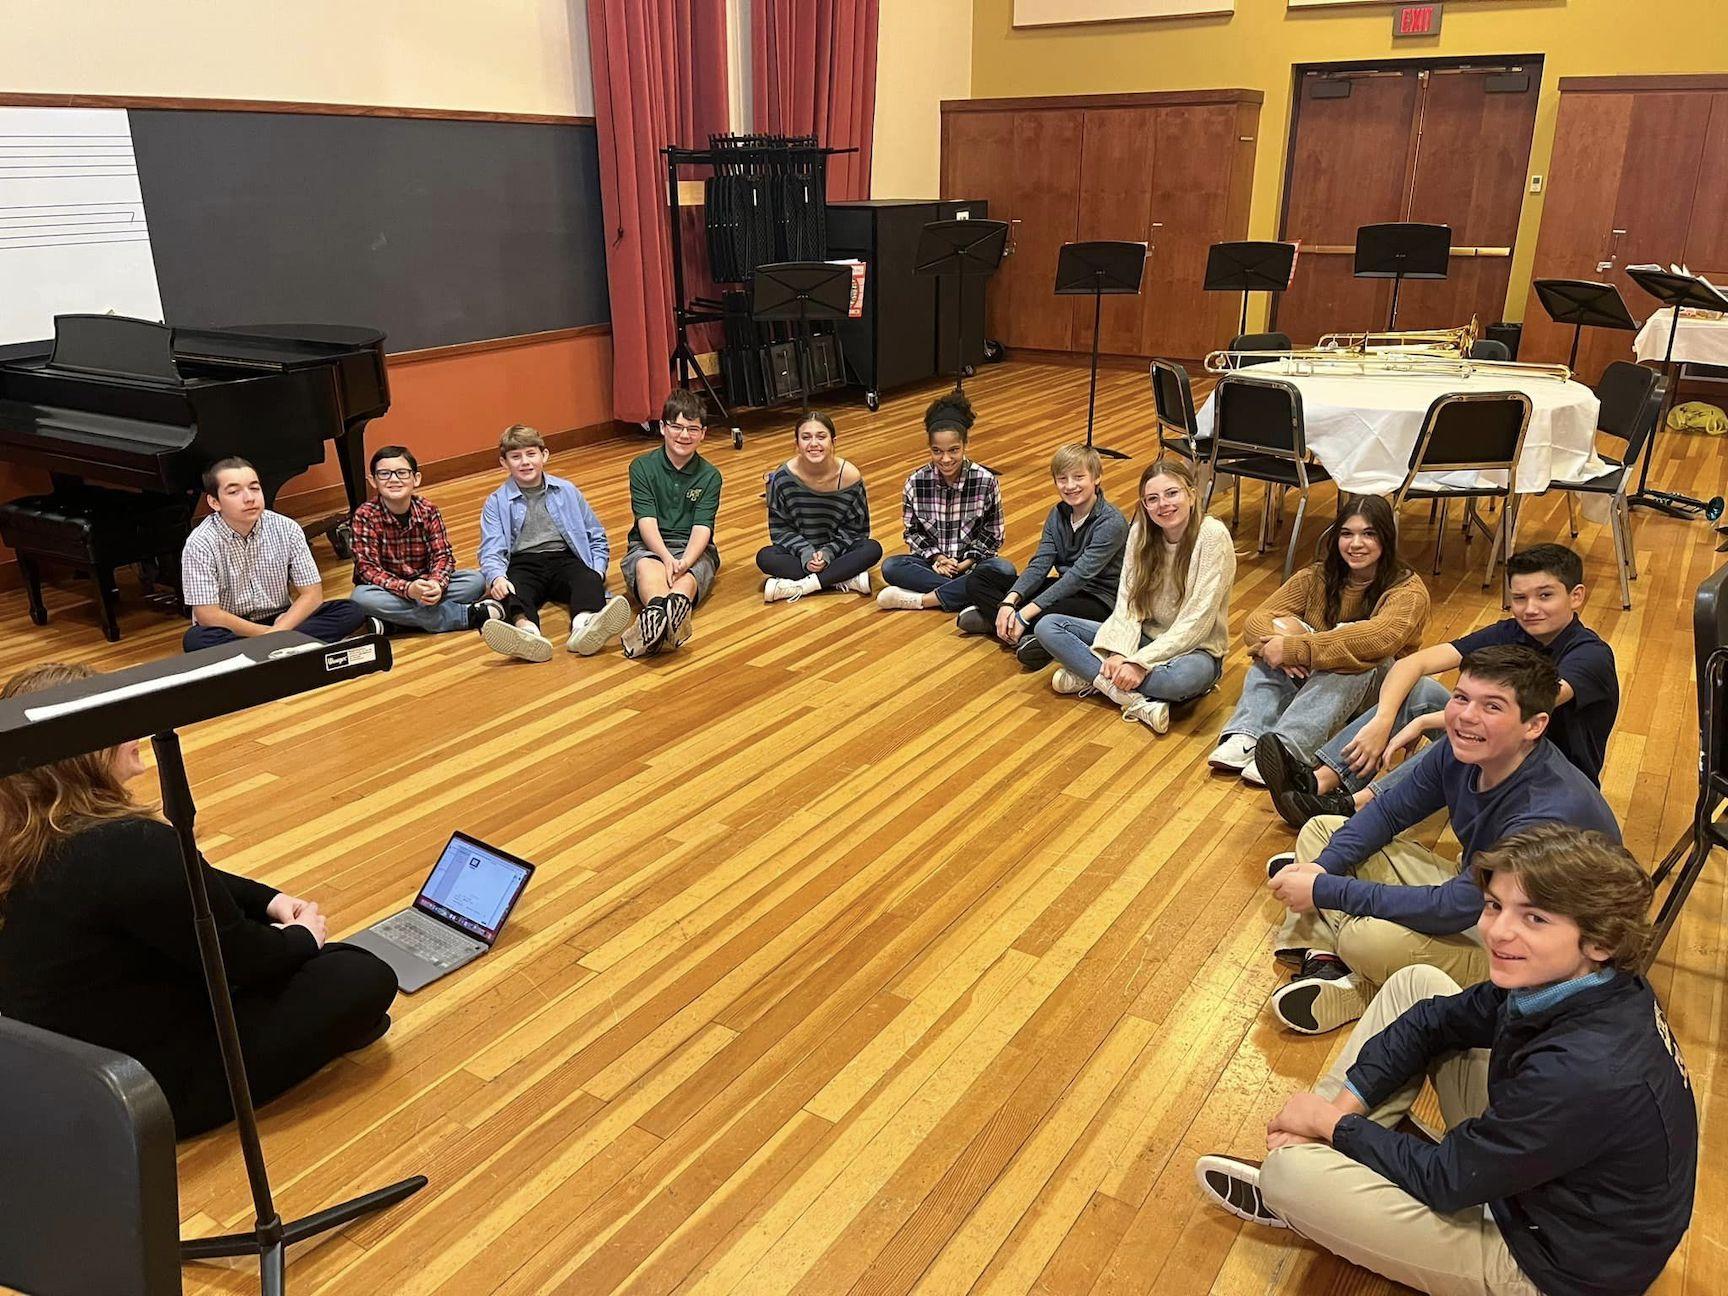 The brass students have a breakout session with one of the Seton Hill music education majors